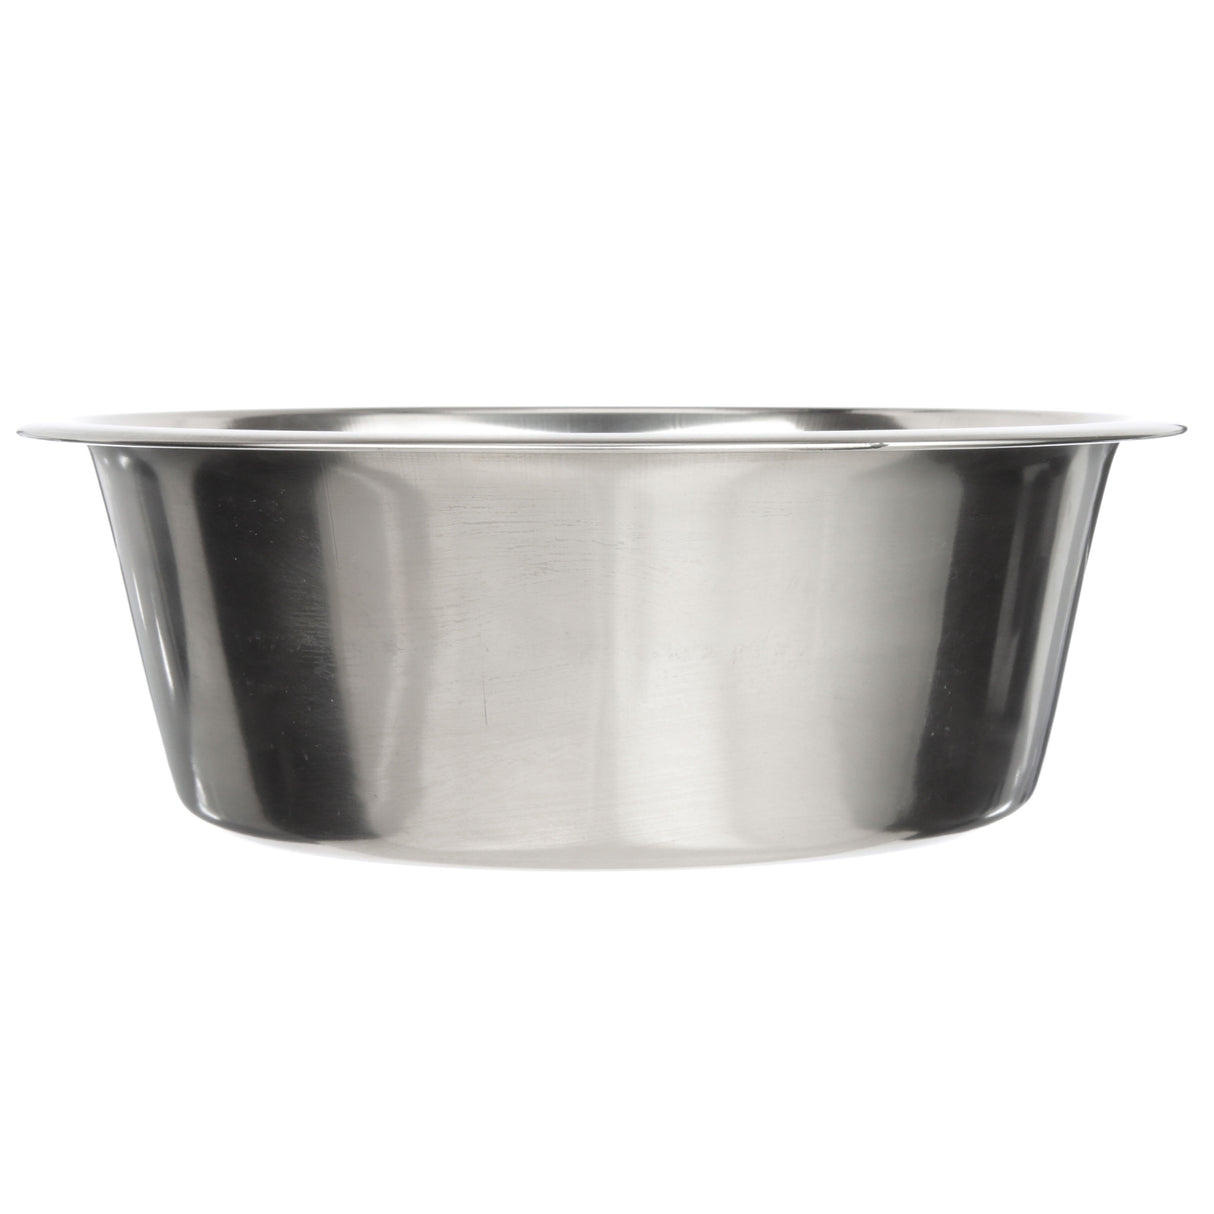 Stainless Steel Bowl side view